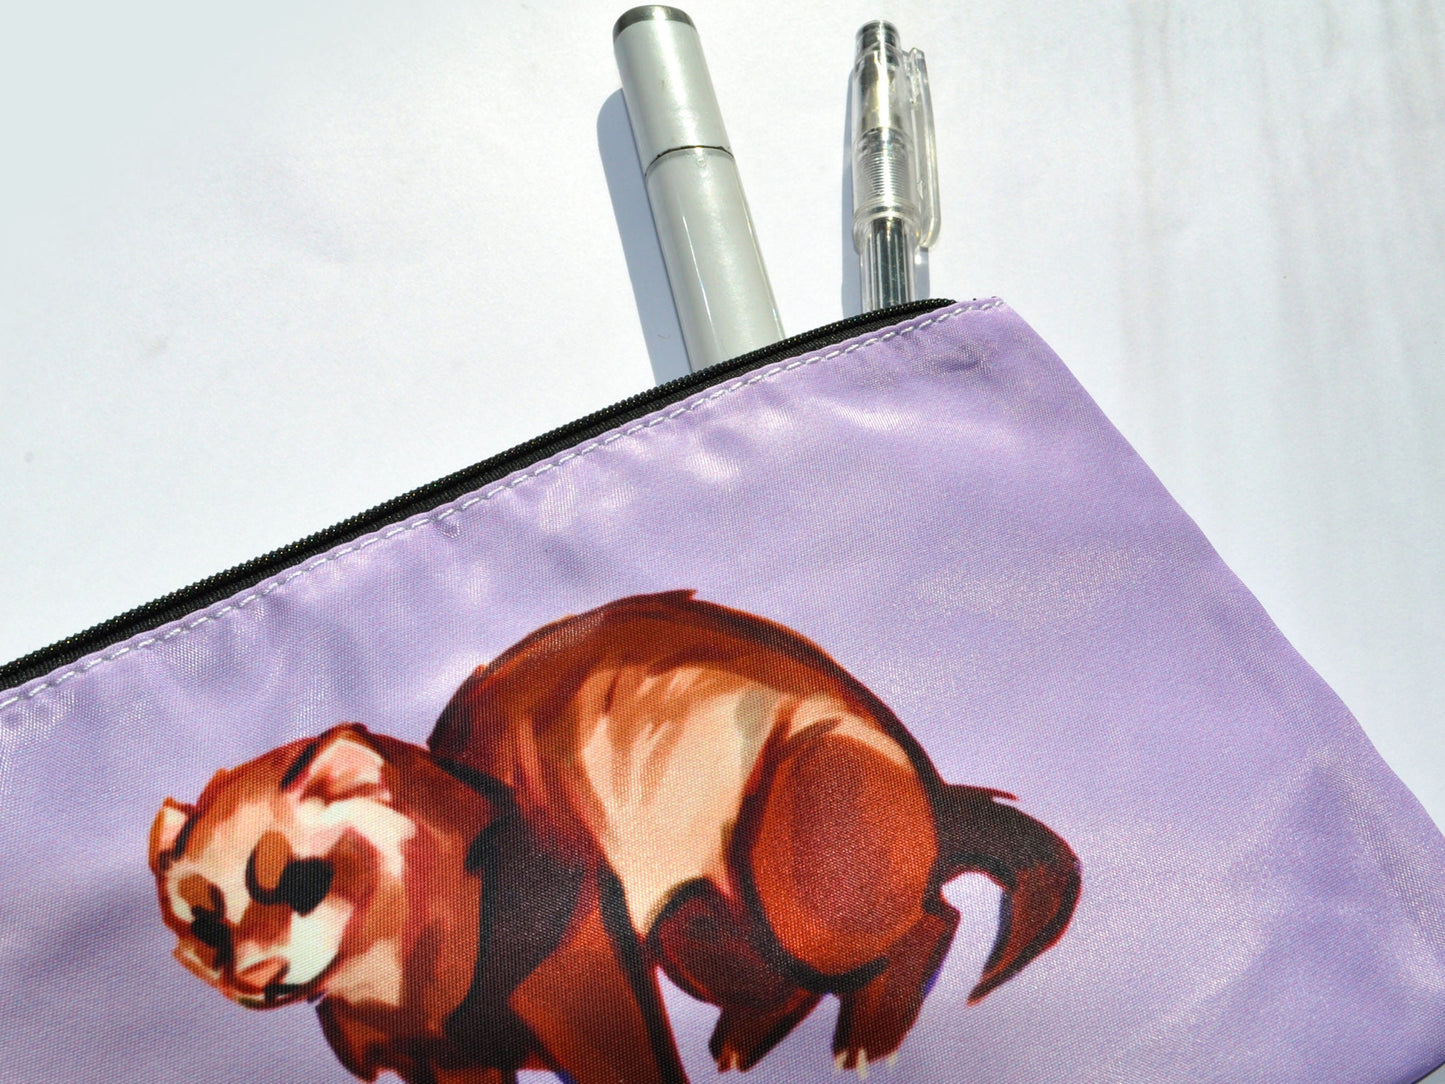 Rude Ferret Pencil Case - Zipper Bag for Cosmetics or Stationery